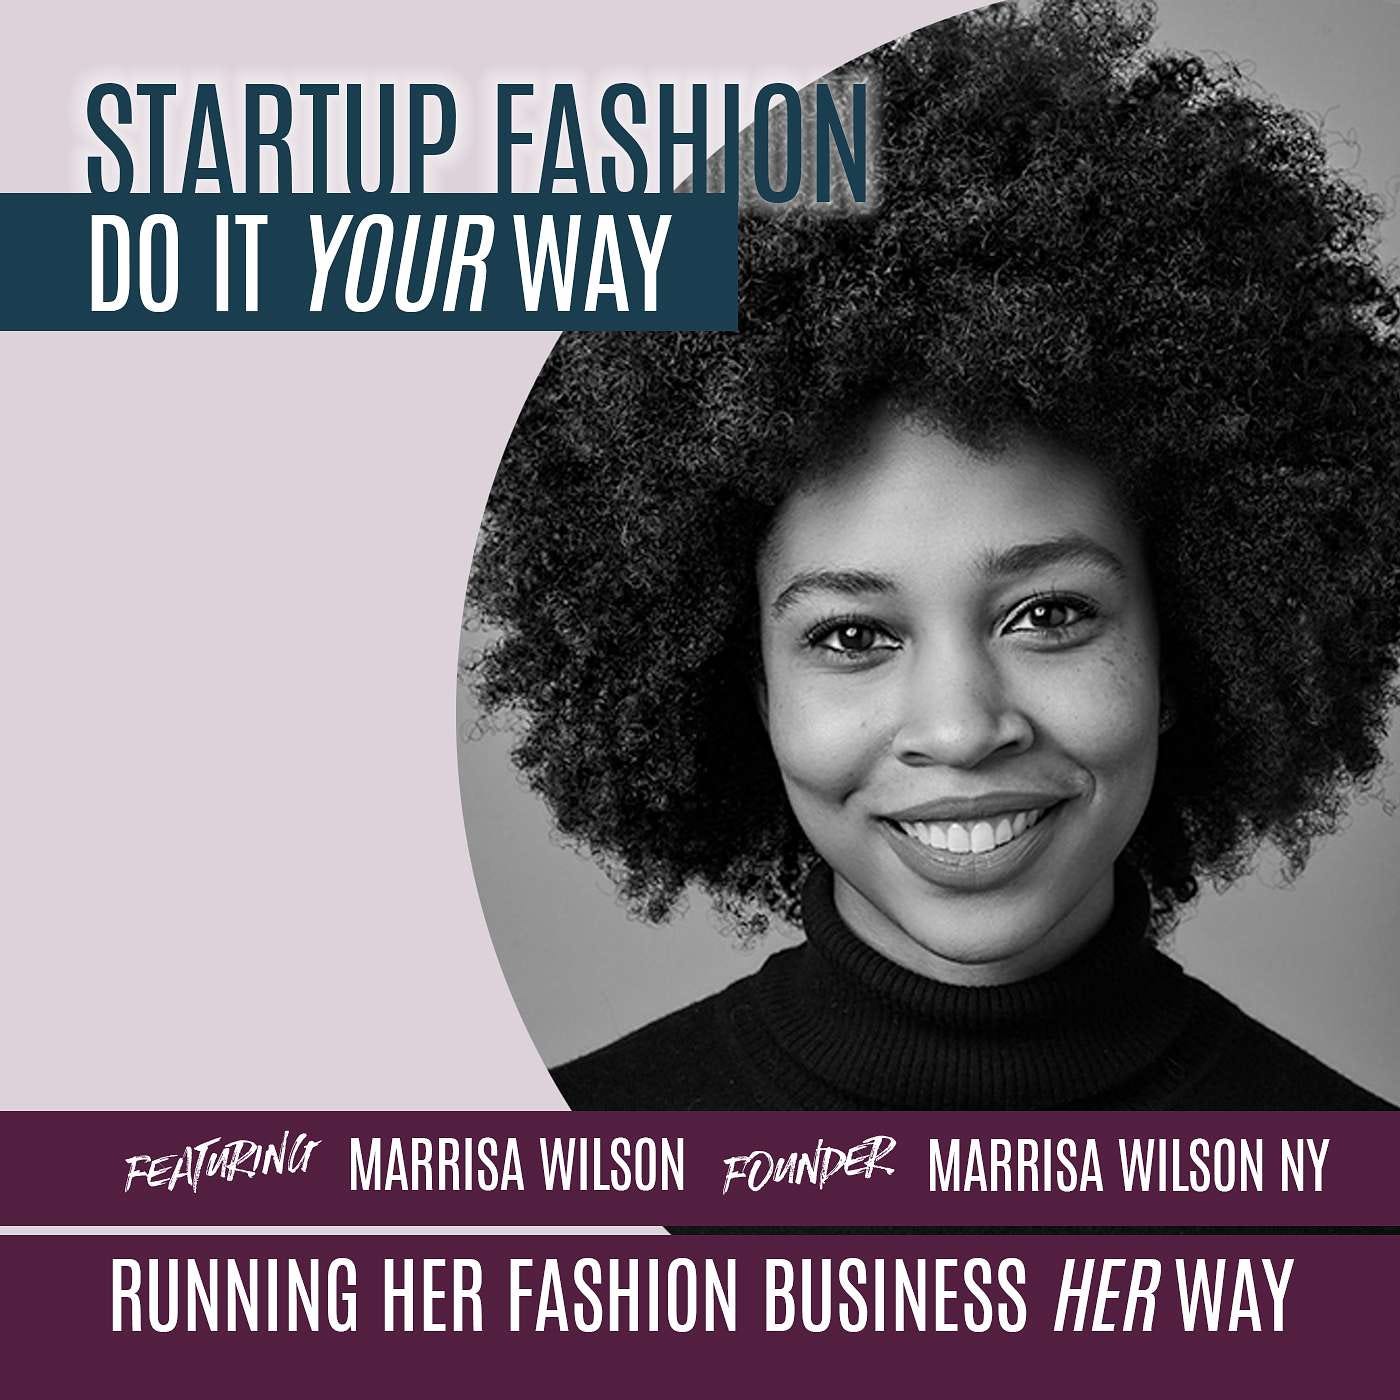 Independent Fashion Brand MARRISA WILSON NY Shares What it's Like to Run a Successful Business